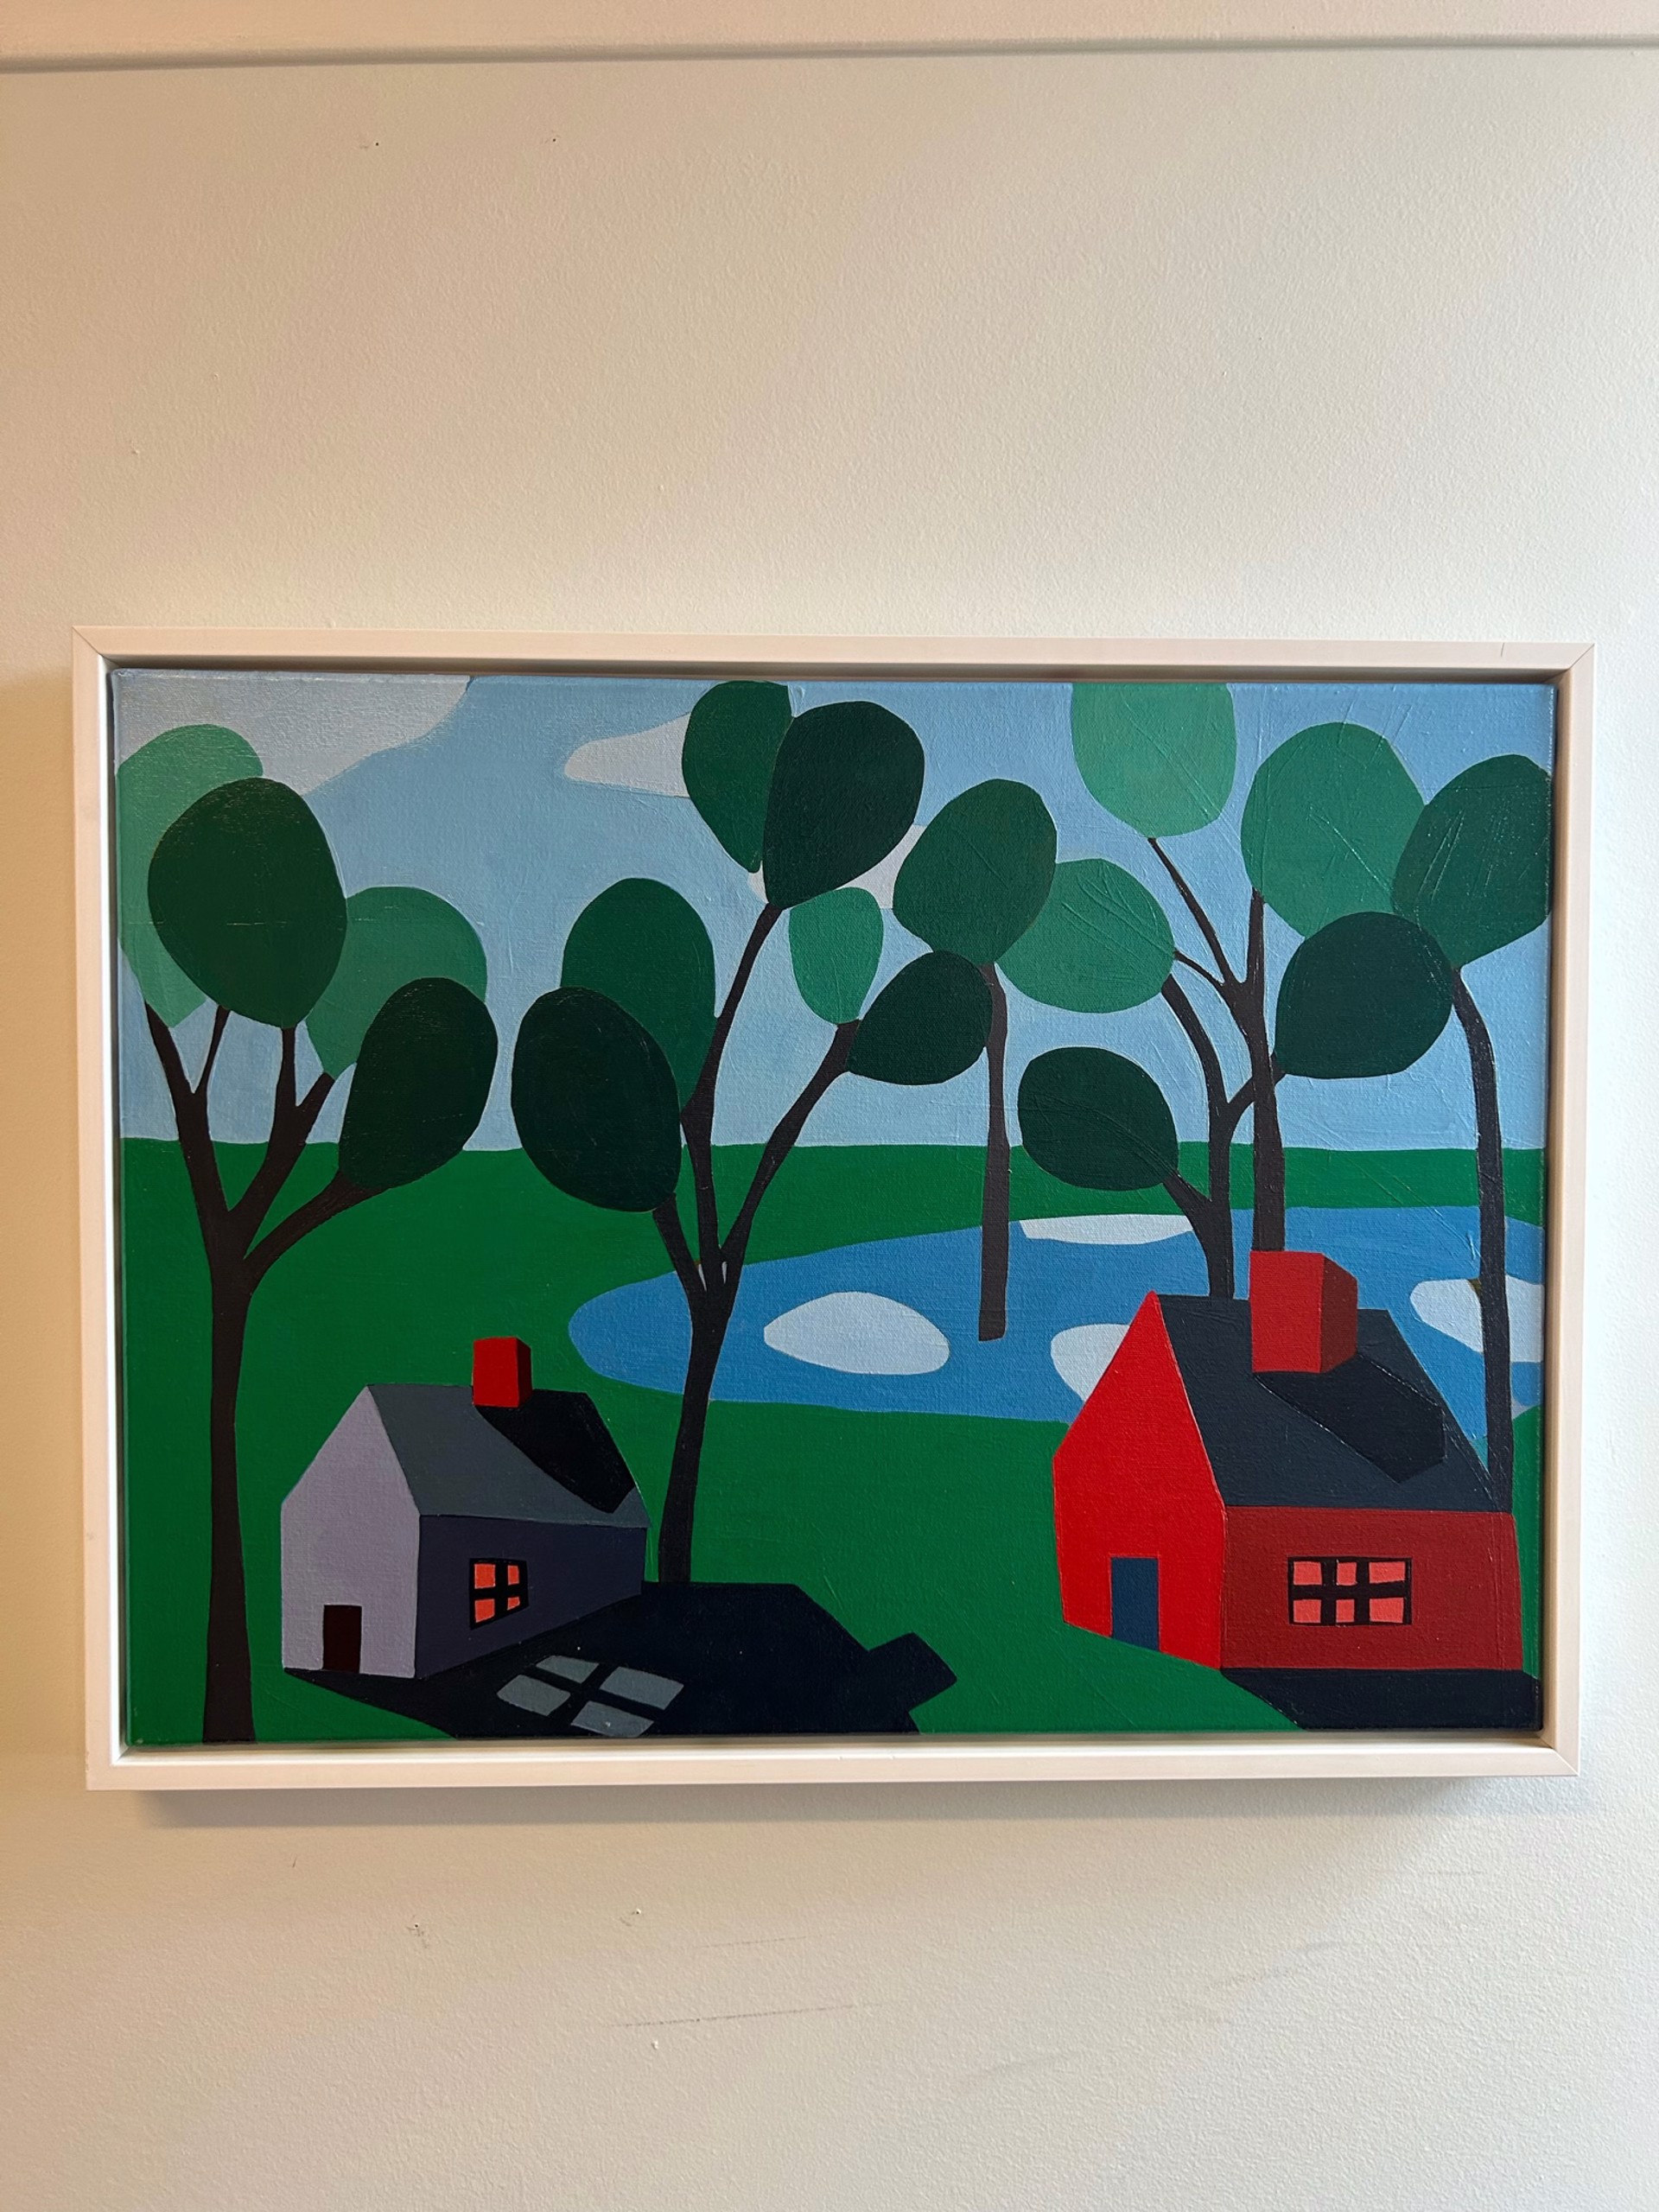 Red House and Gray House in Forest with Lights On by Sage Tucker-Ketcham